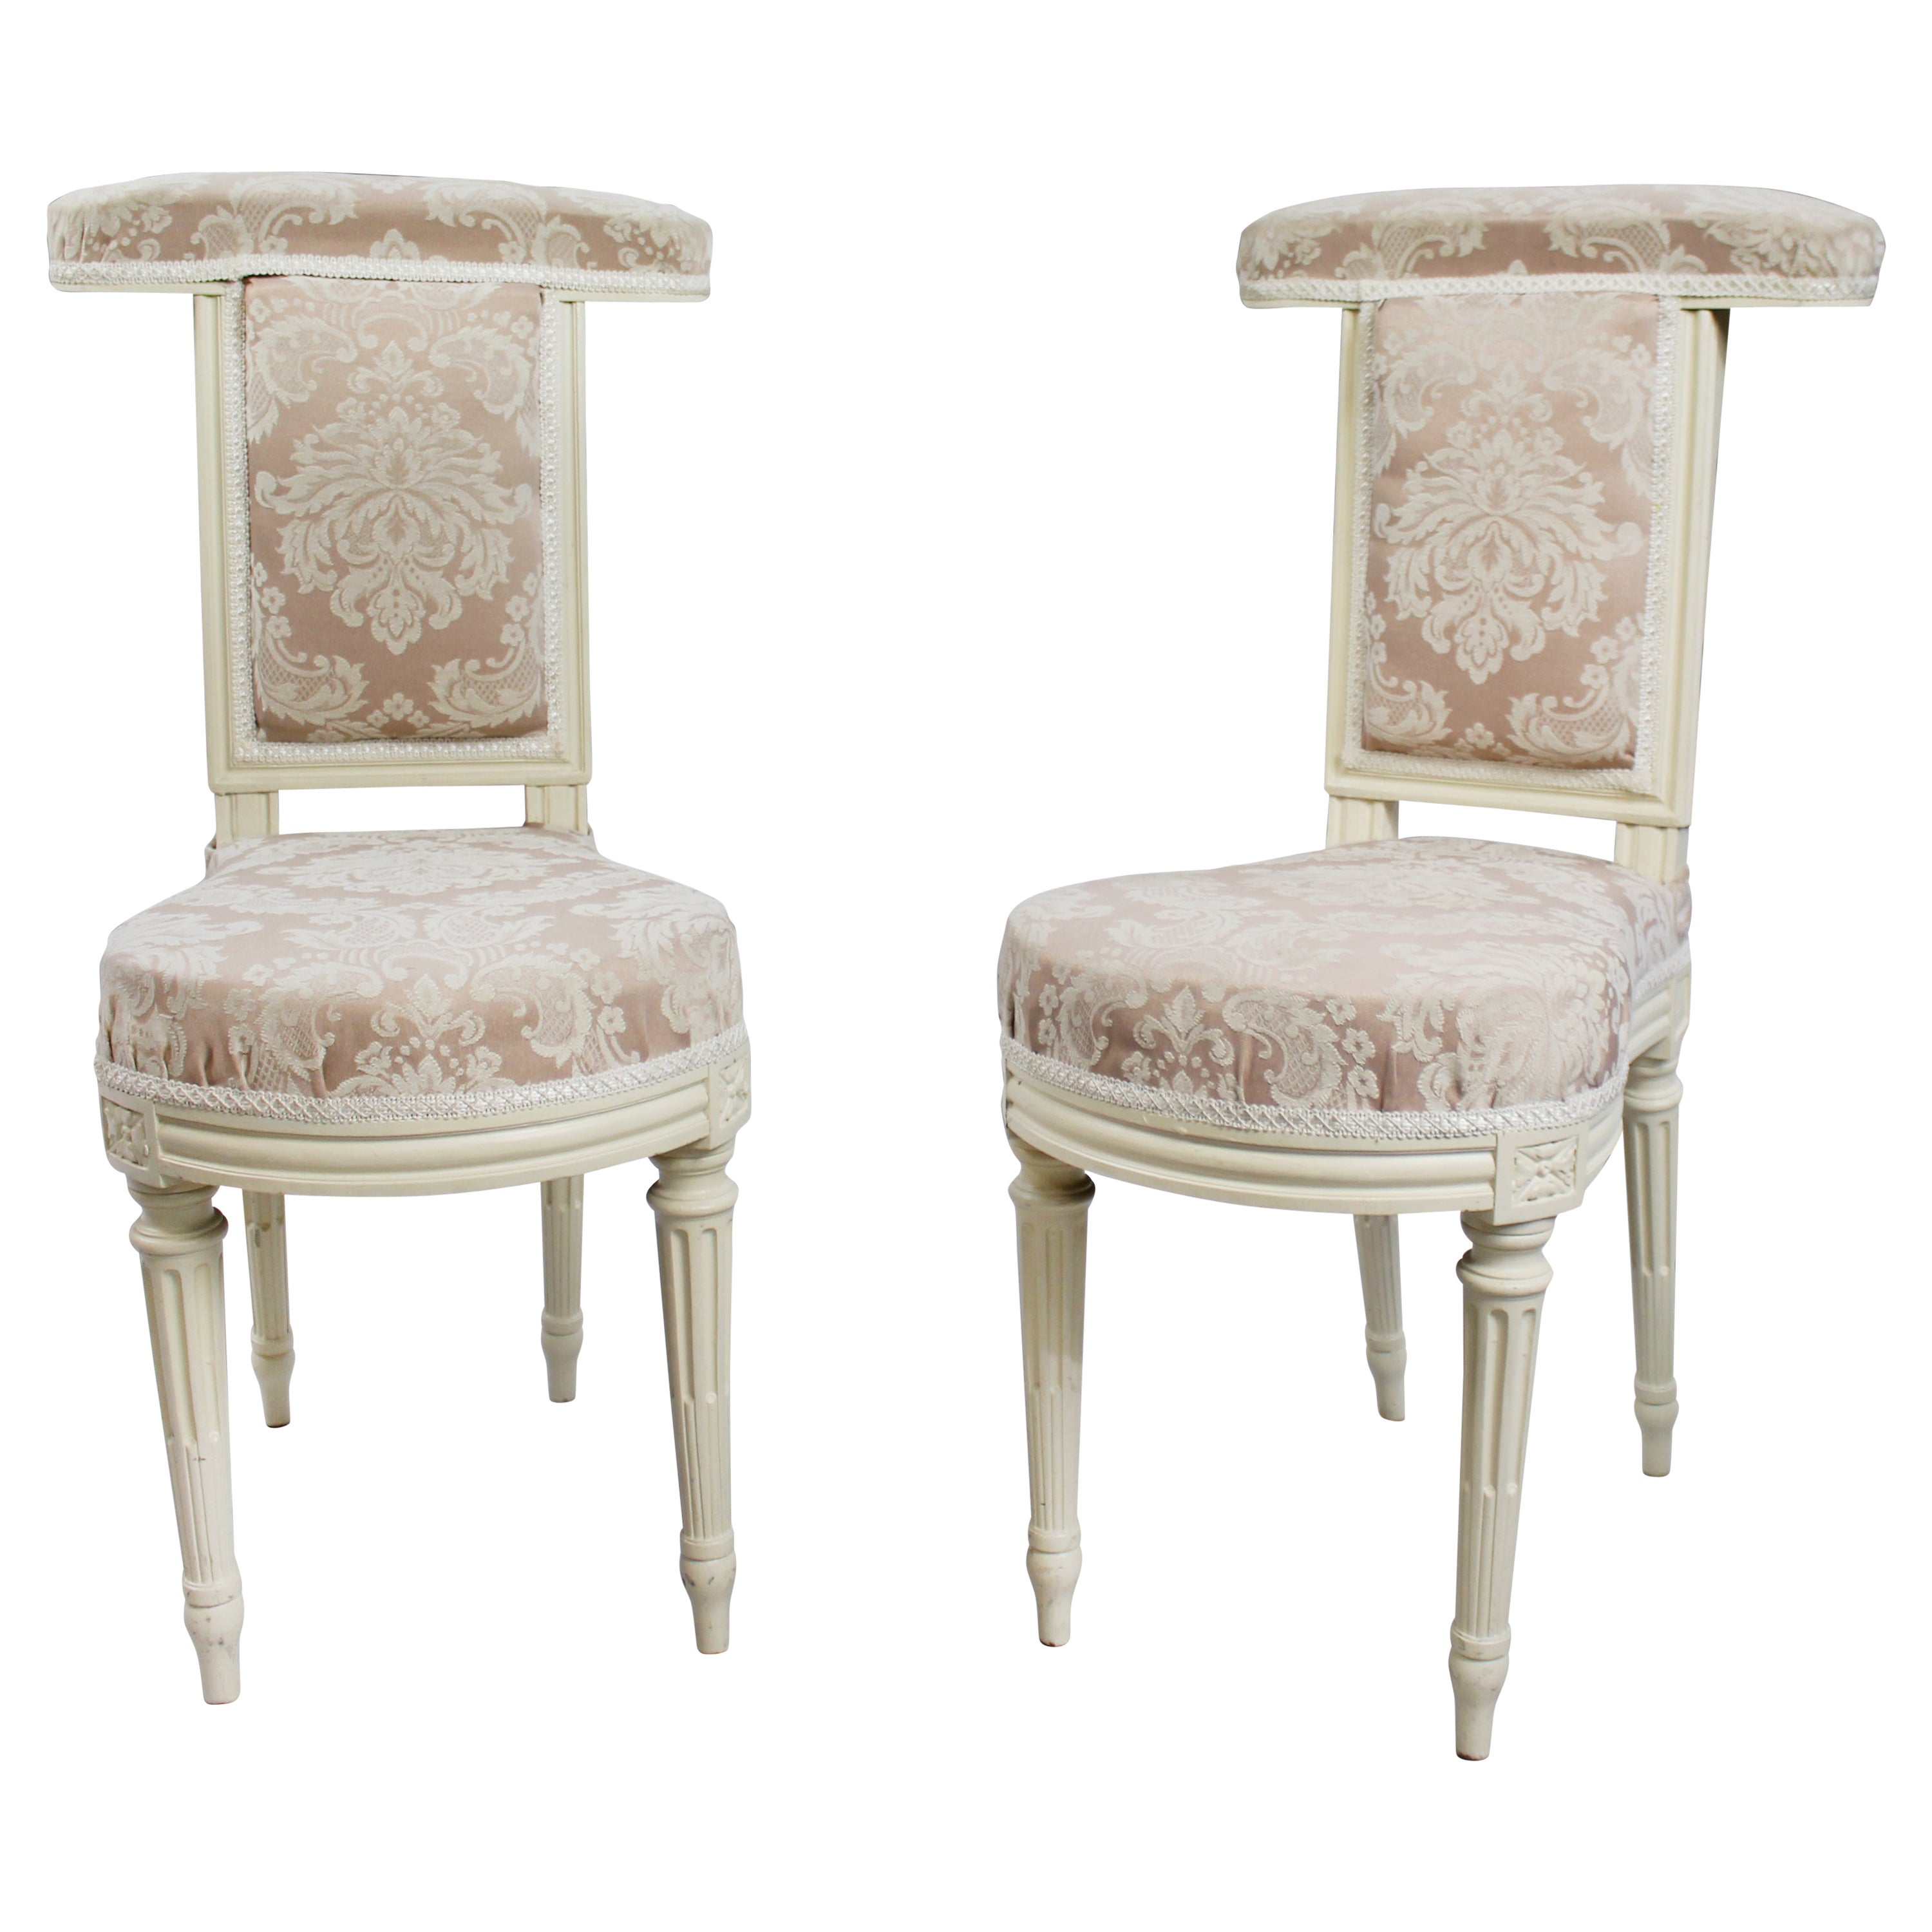 Pair of Early Antique French Painted Voyeuse Chairs For Sale